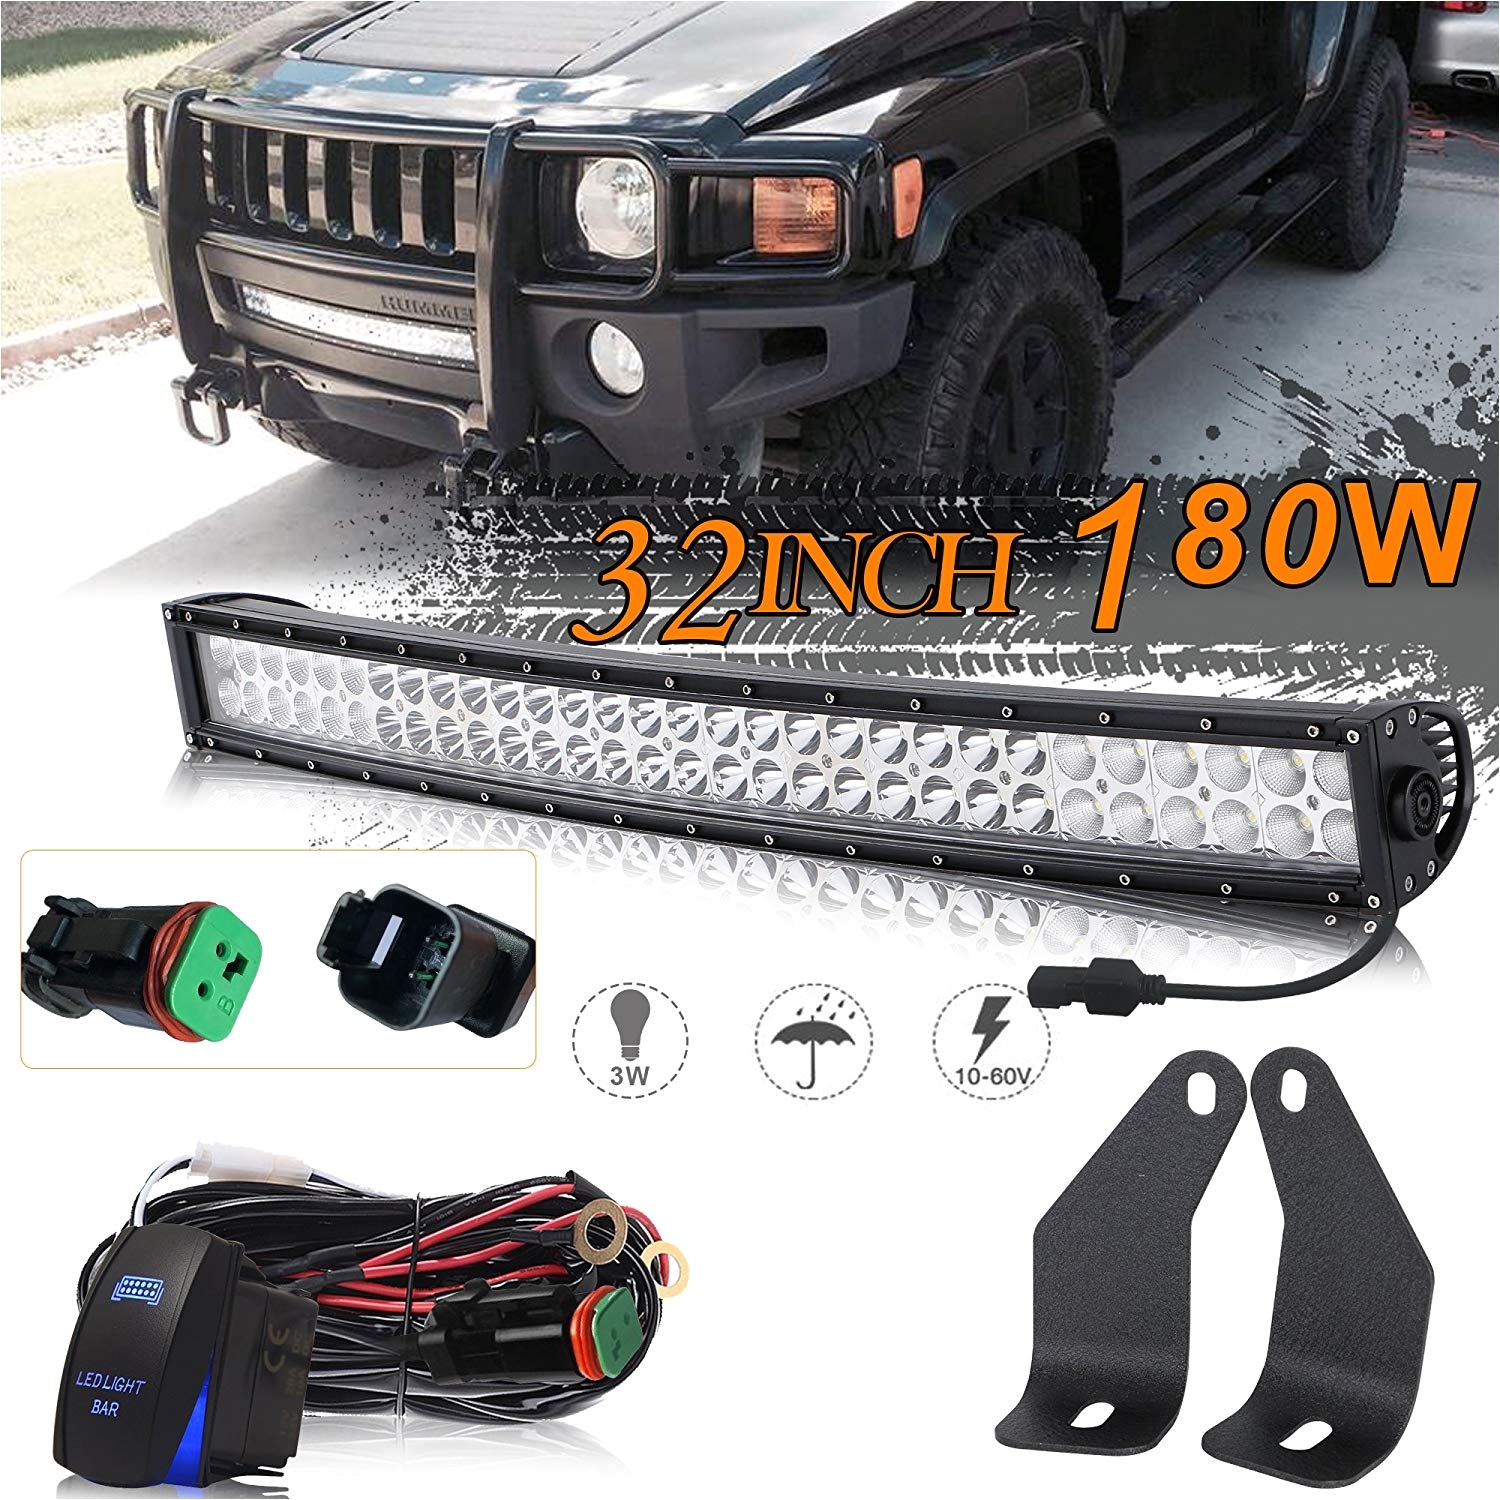 amazon com uni filter dot approved 32inch 180w curved led light bar 2pcs front lower hidden bumper mounting brackets 1x dt connector wiring harness kit